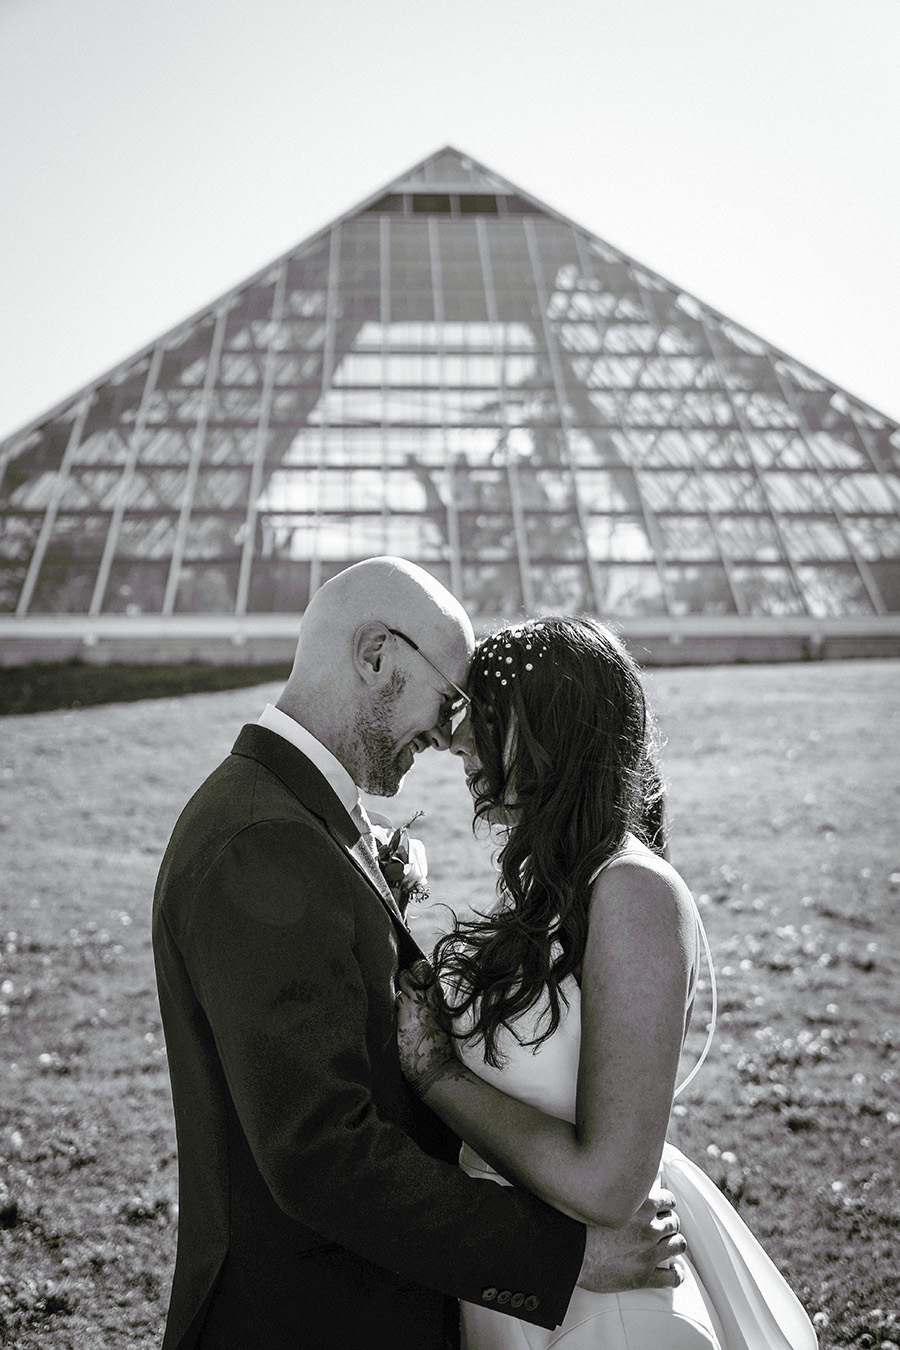 Black & white photo of bride and groom outside and in front of pyramid